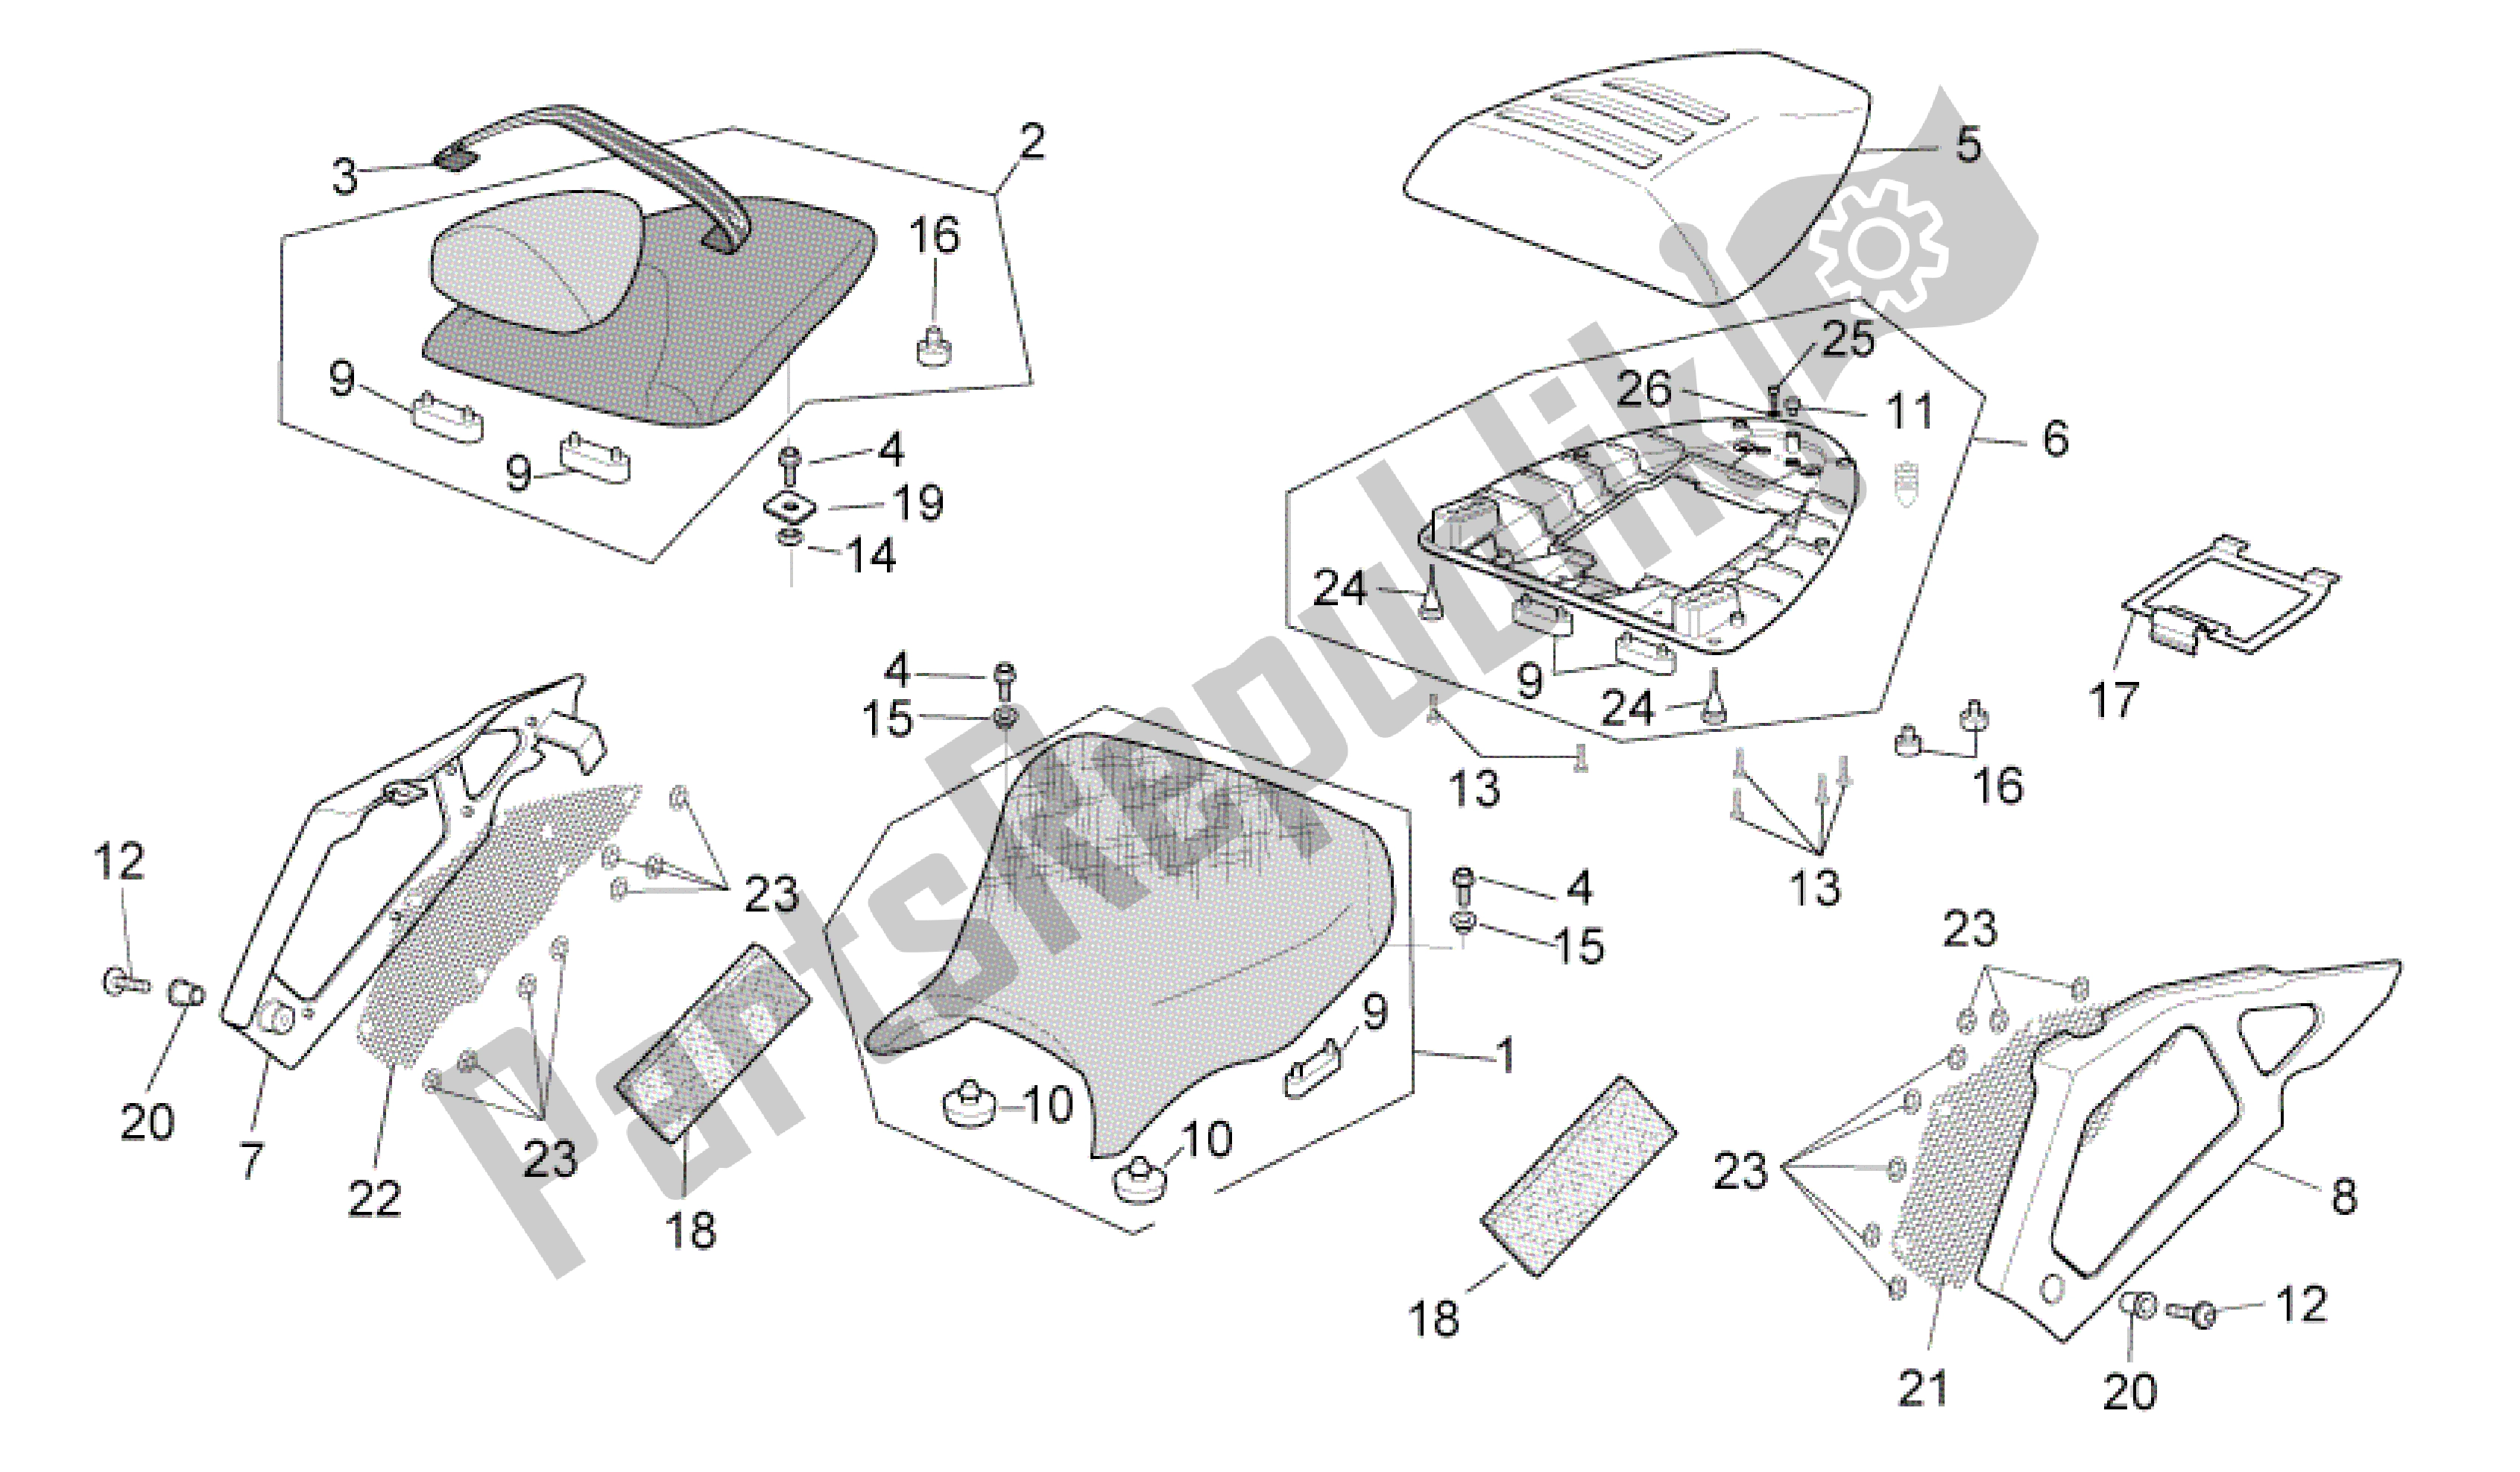 All parts for the Saddle of the Aprilia RSV Mille 3963 1000 2003